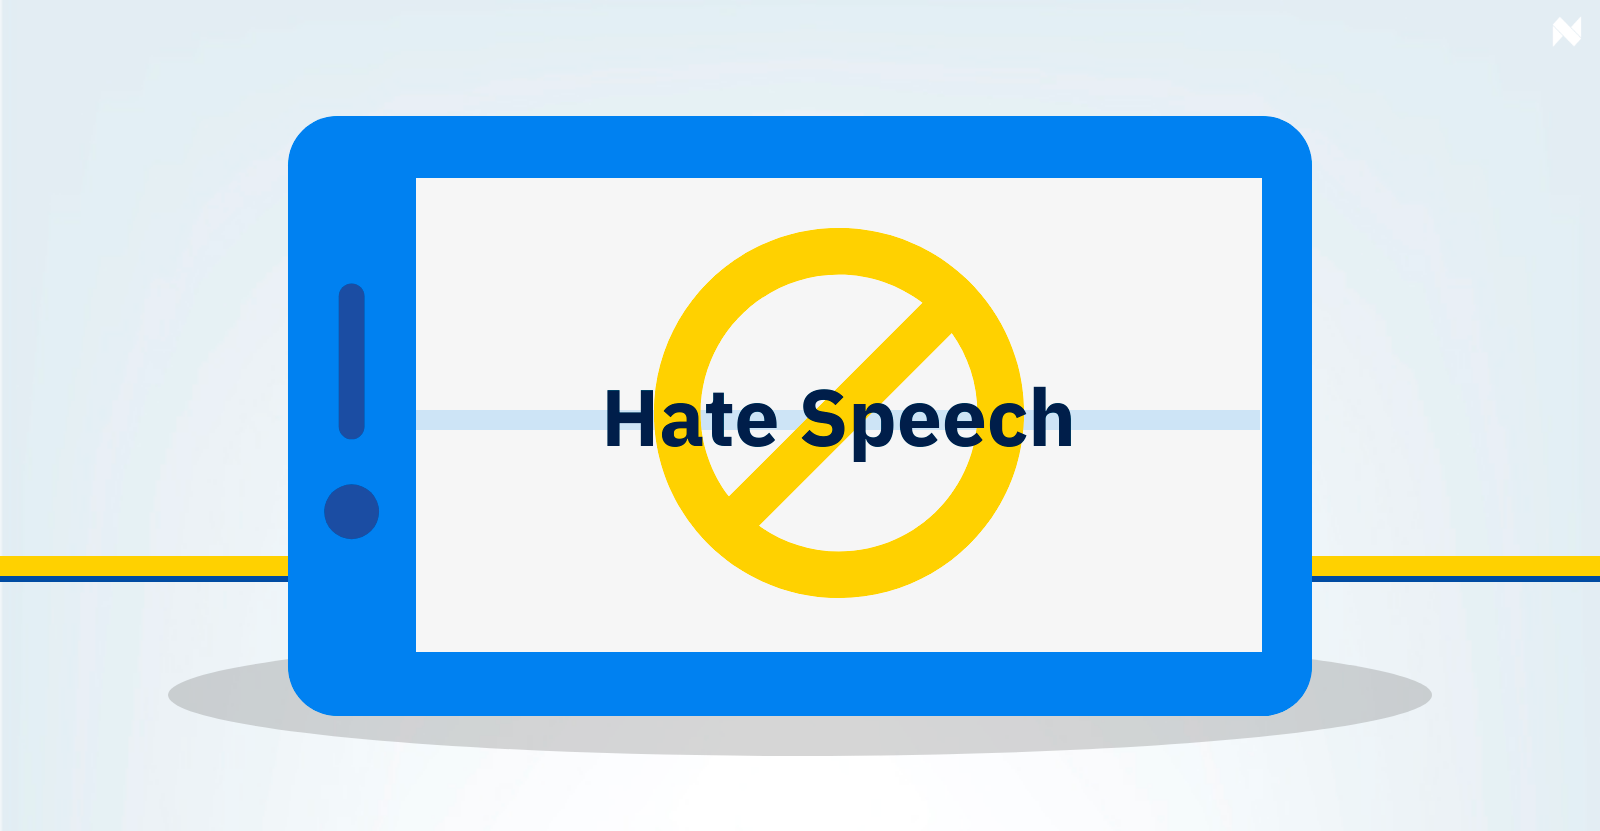 AI is a tool that can contribute to ending hate speech and making a more peaceful society